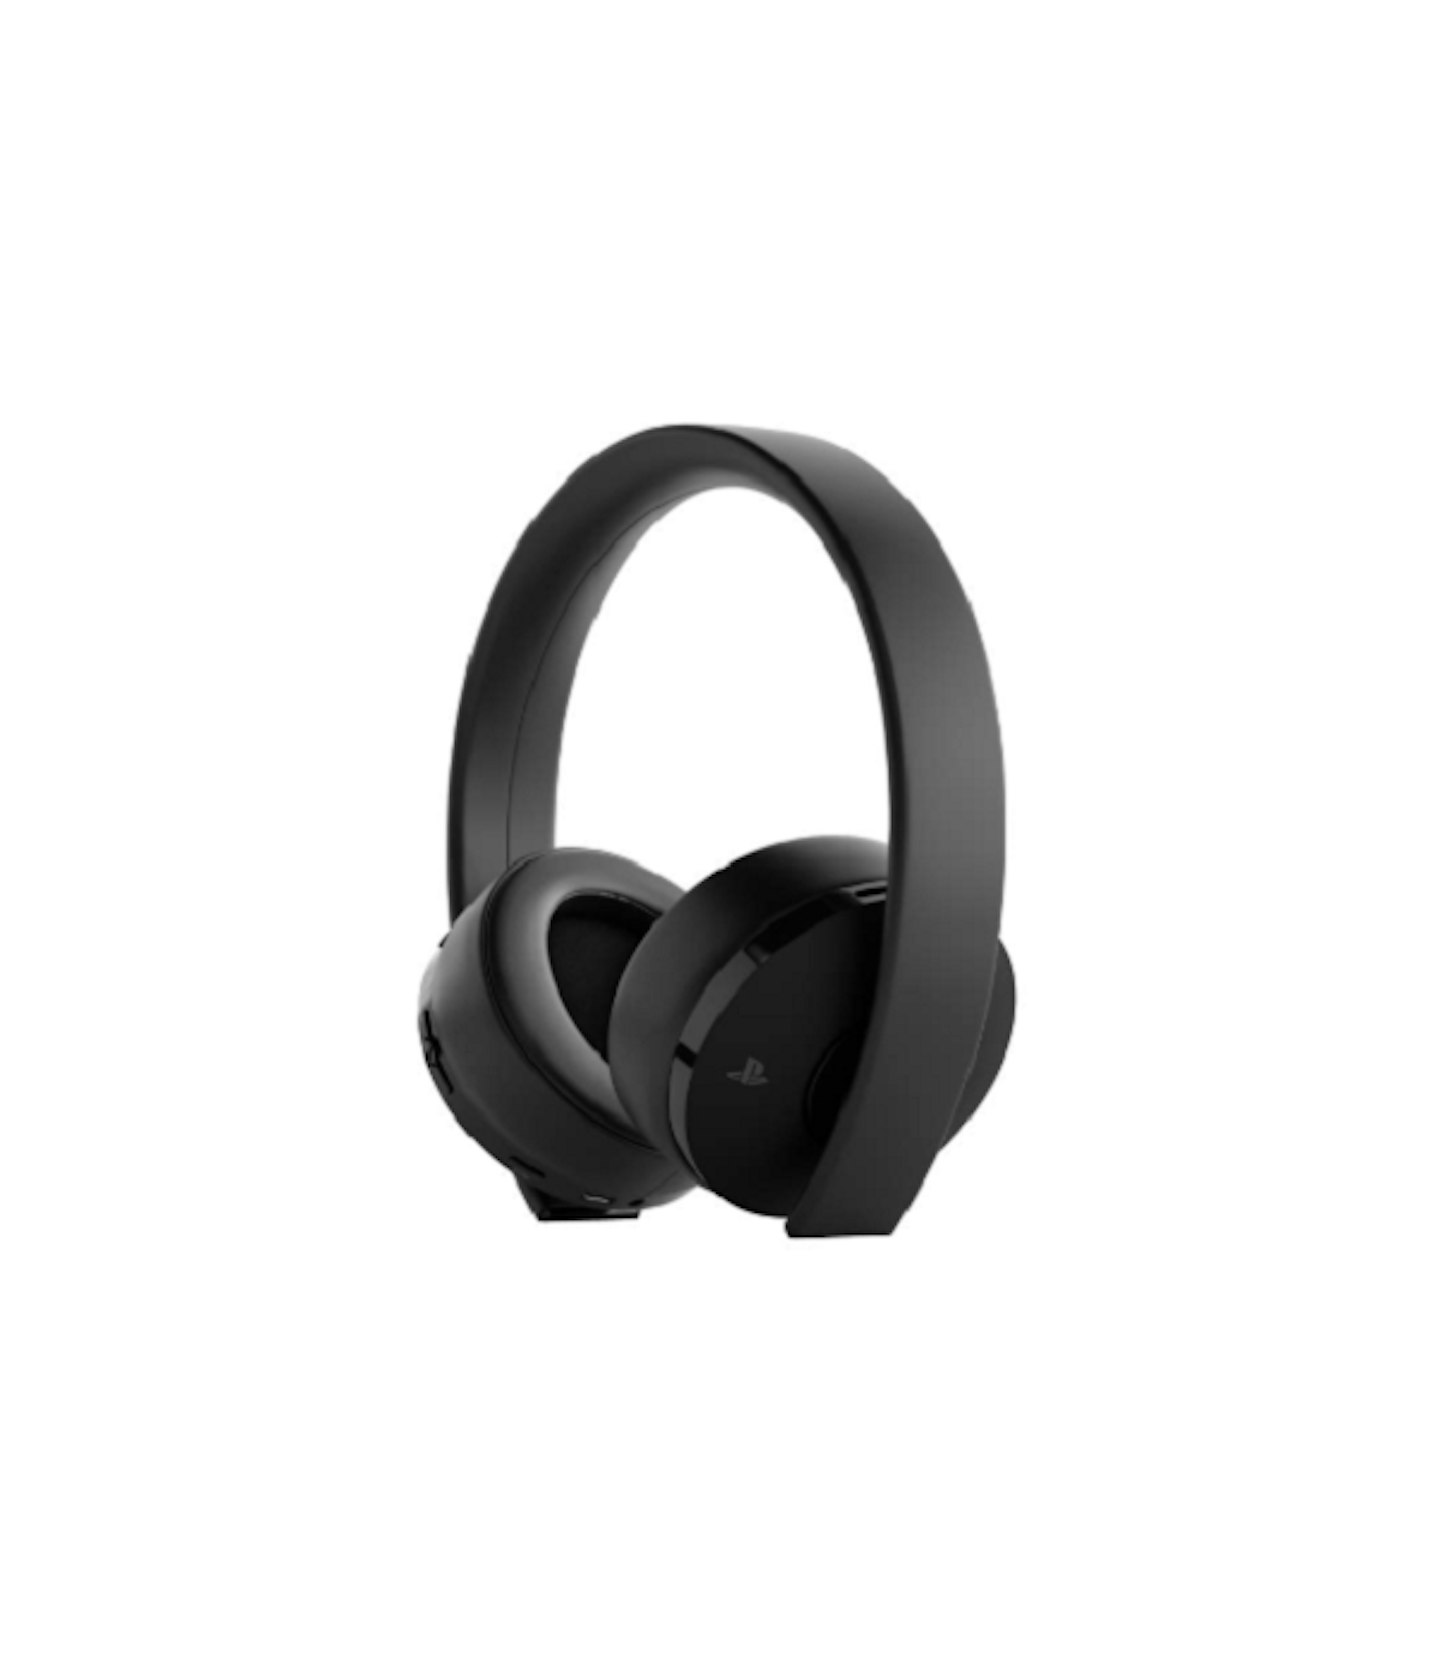 PlayStation 4 Gold Wireless Headset, £64.50